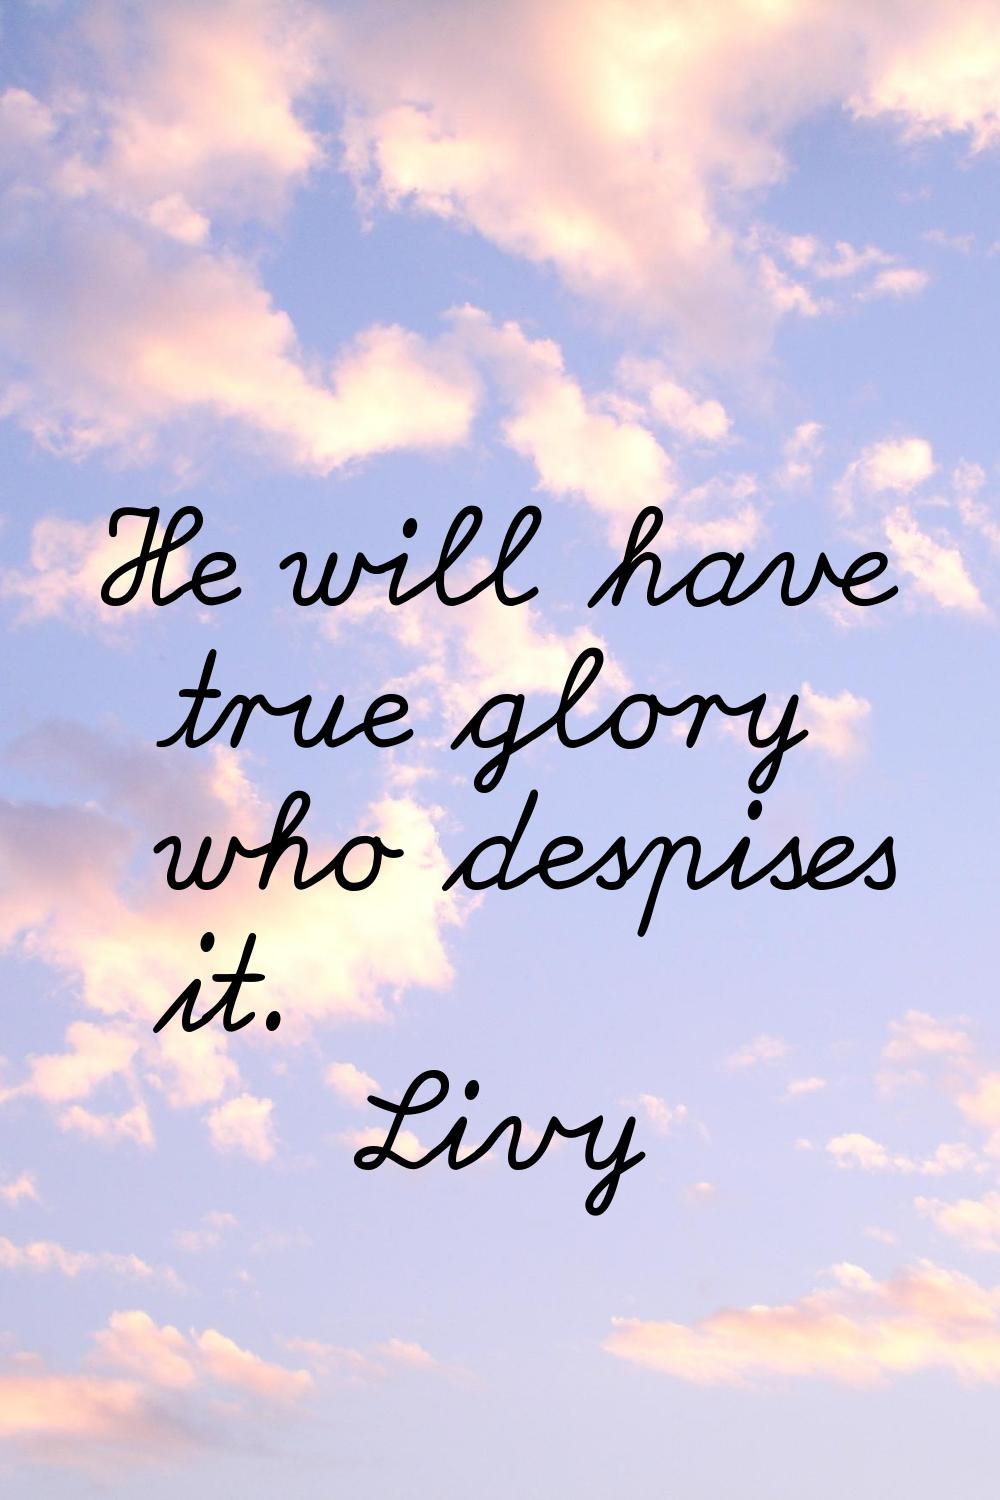 He will have true glory who despises it.